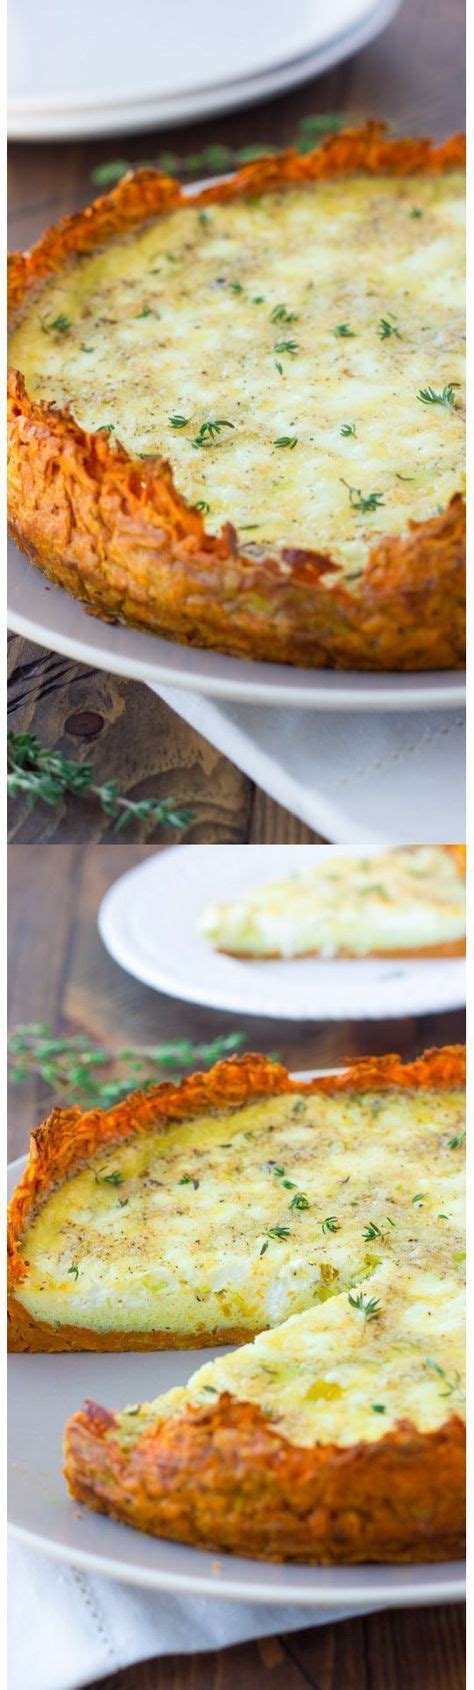 Sweet Potato Crusted Quiche With Goat Cheese And Leeks